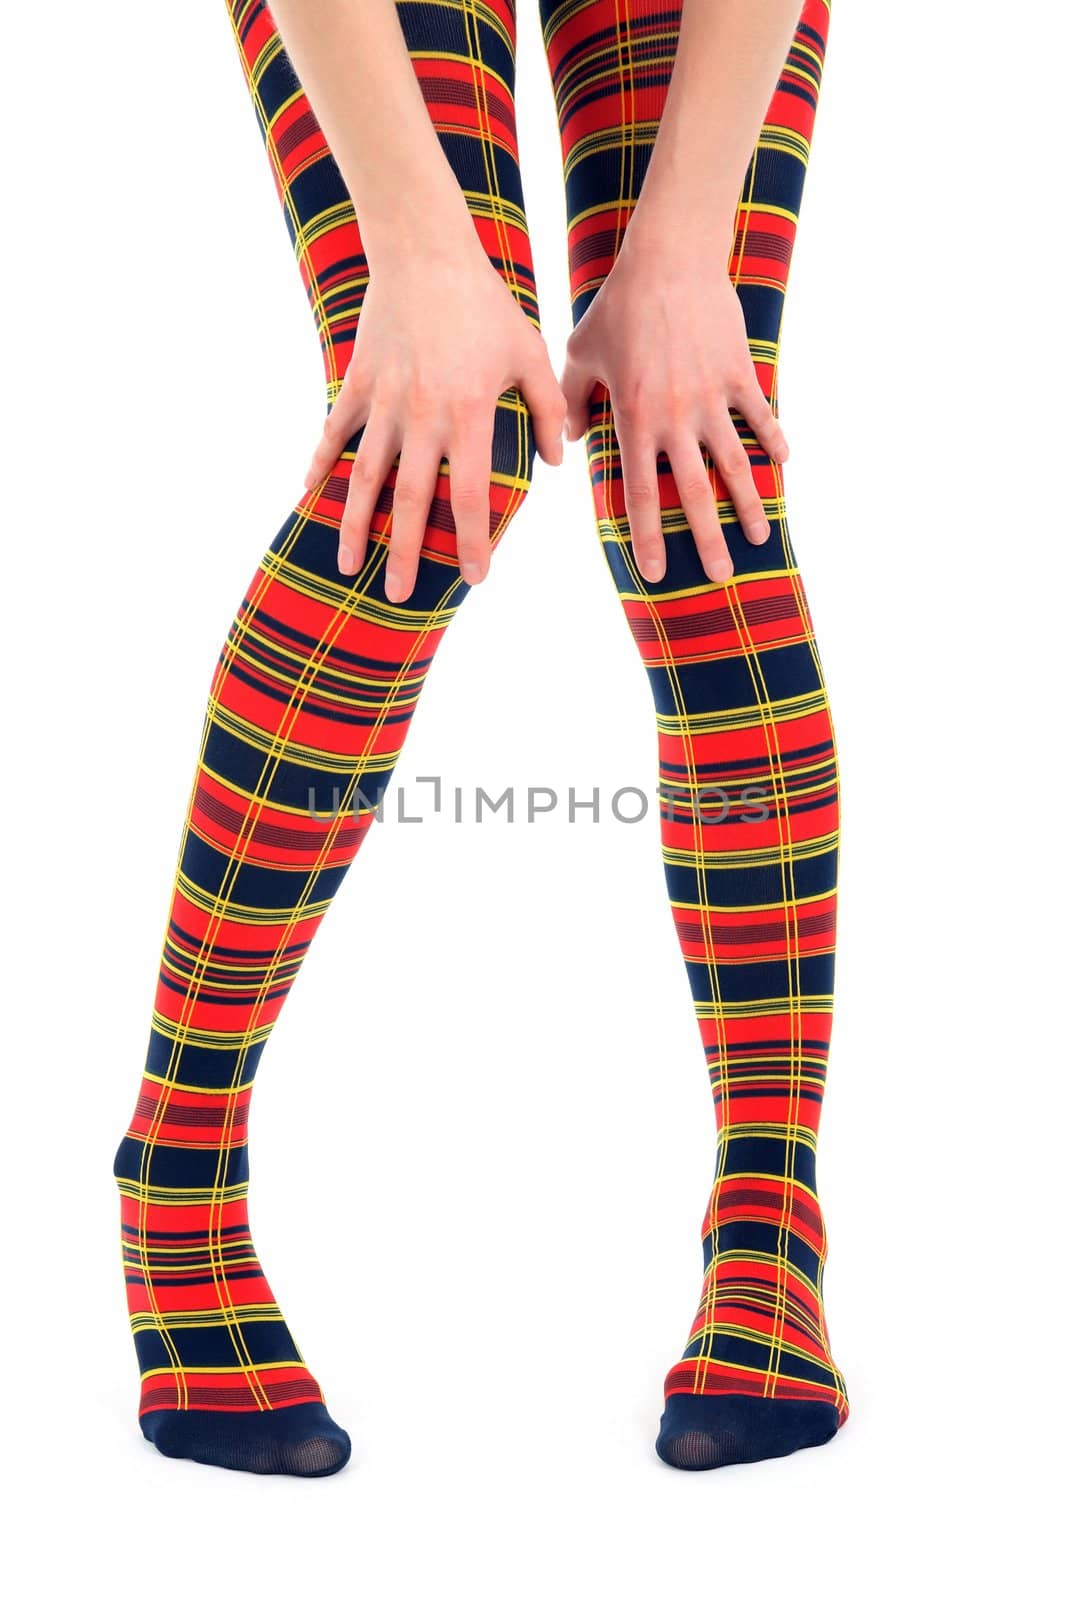 Funny legs in multicolored tights by anikasalsera